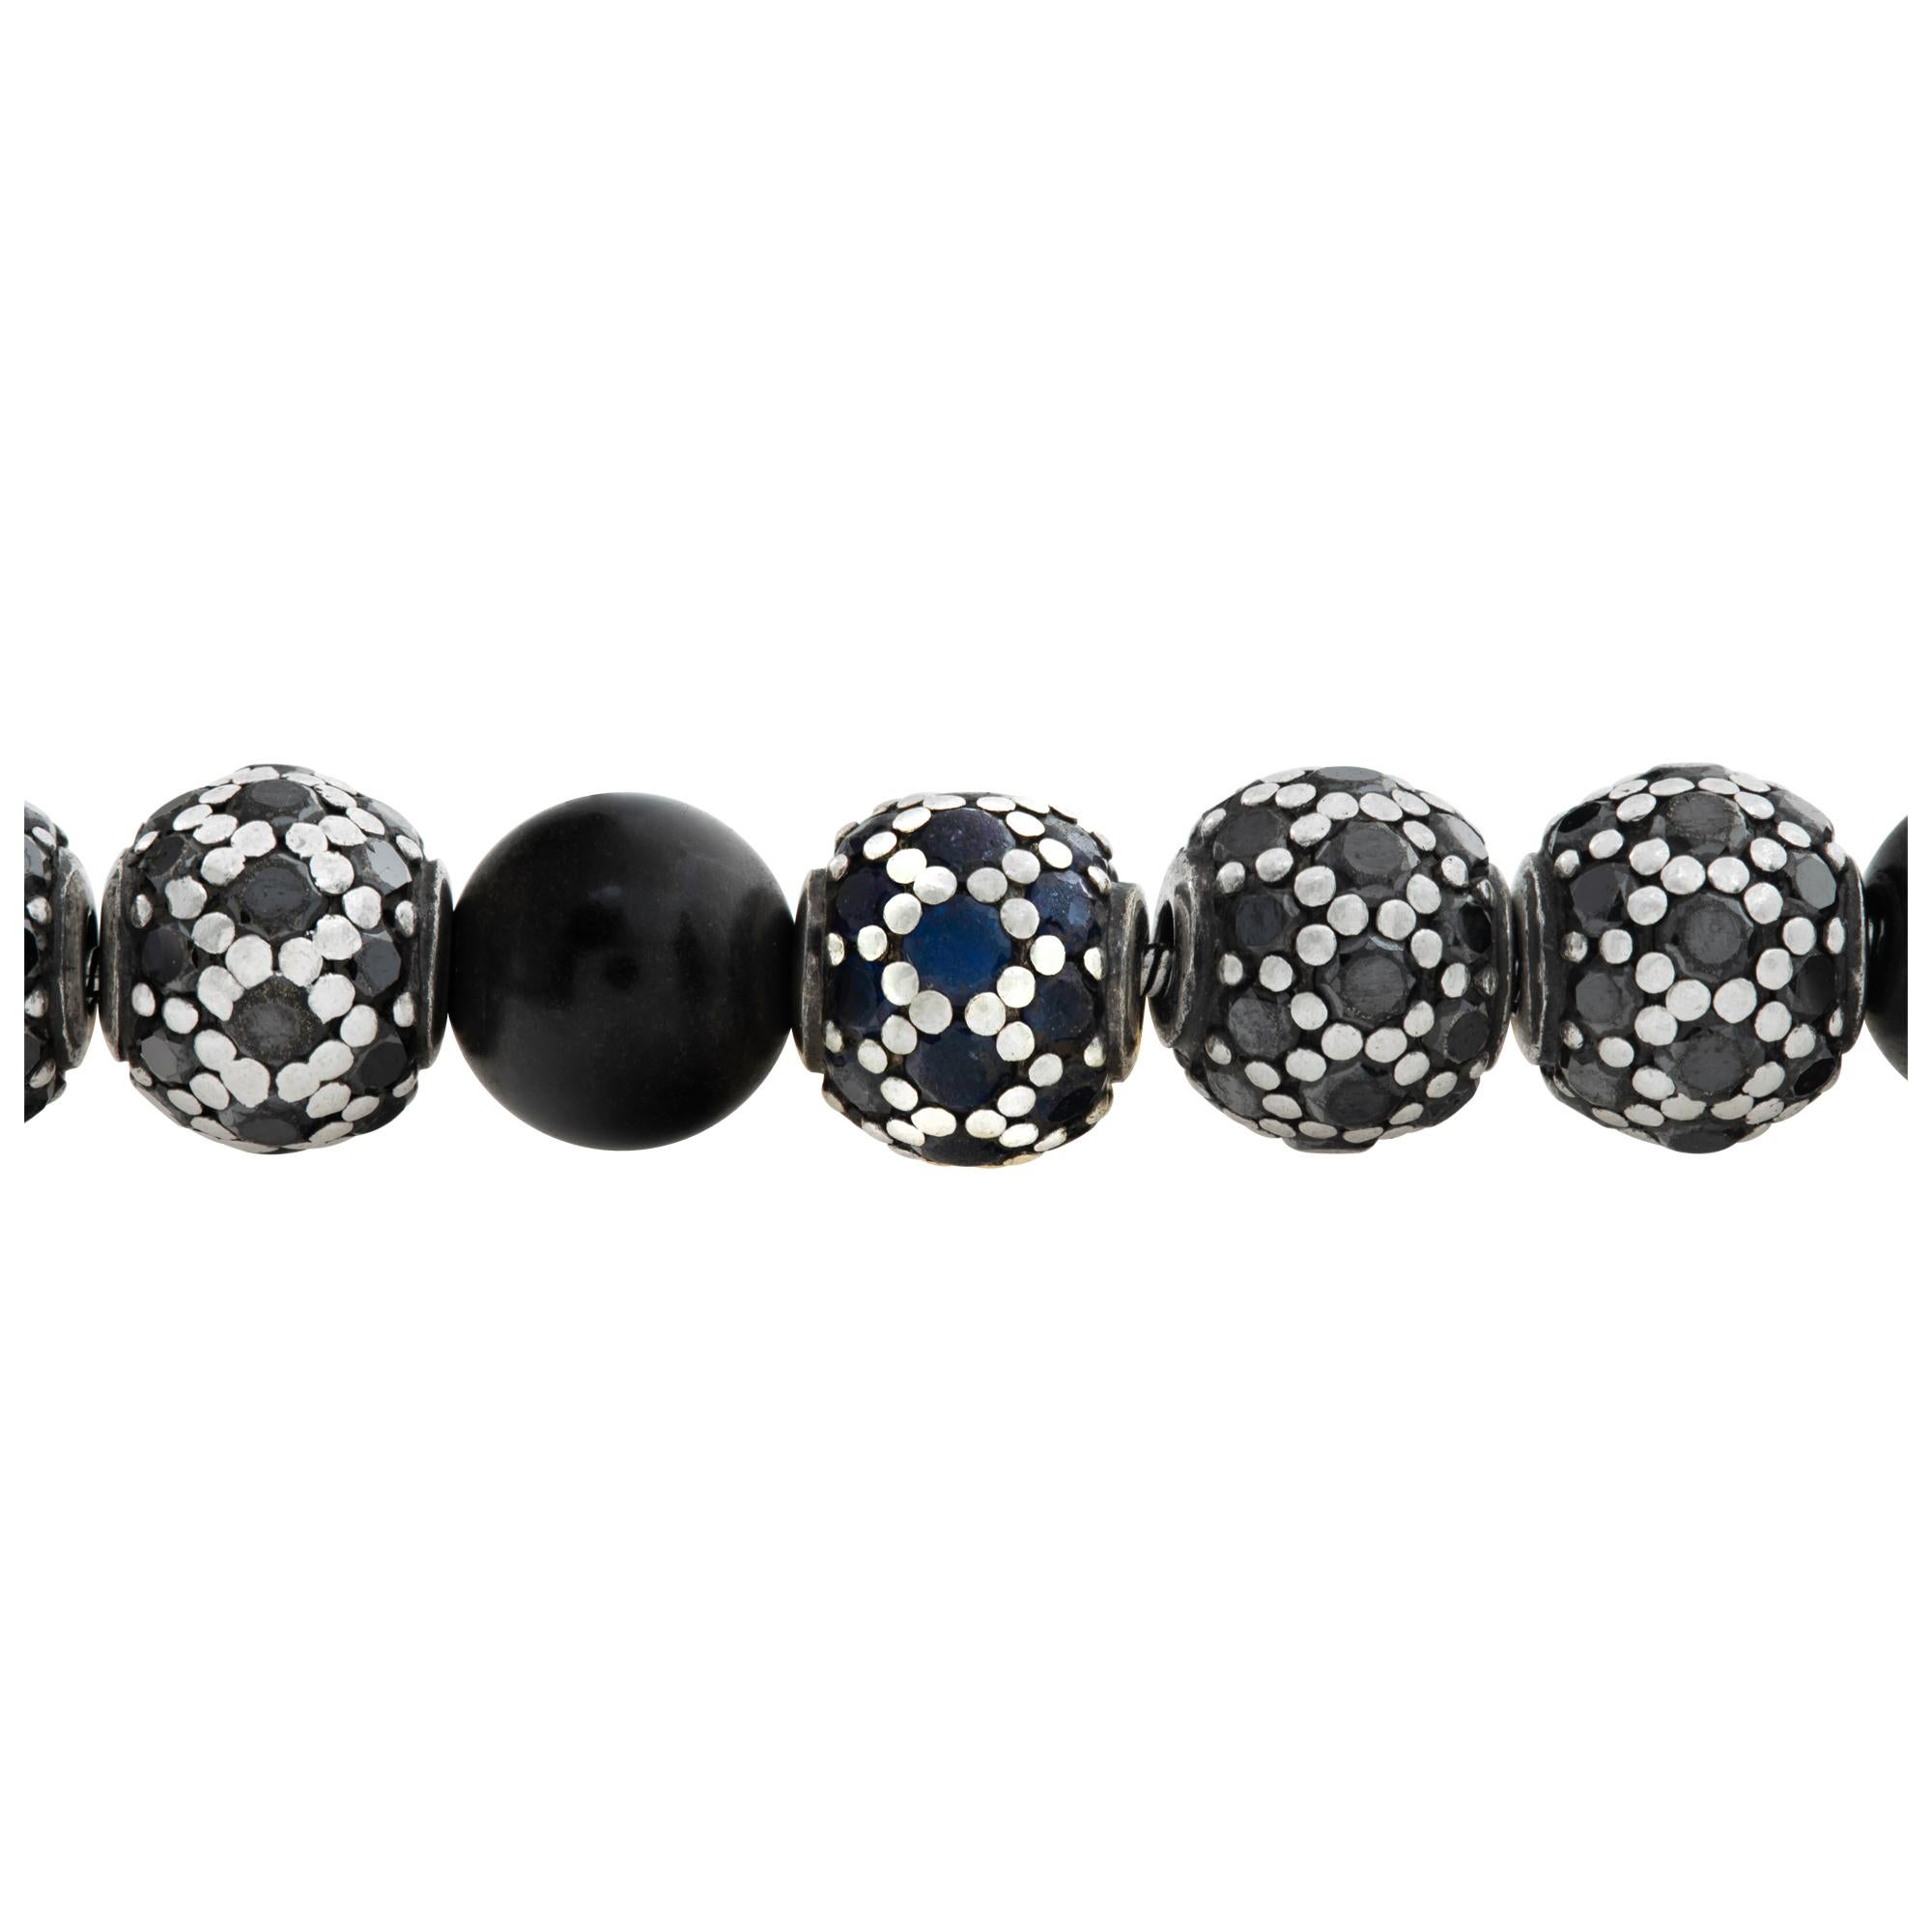 David Yurman Spiritual Bead bracelet with 6 mm black onyx beads, approx. 6.82 cts black diamonds and aqpprox. 3.41 cts blue sapphires in 18k gold. 7.25 inch length. Comes with David Yurman appraisal.